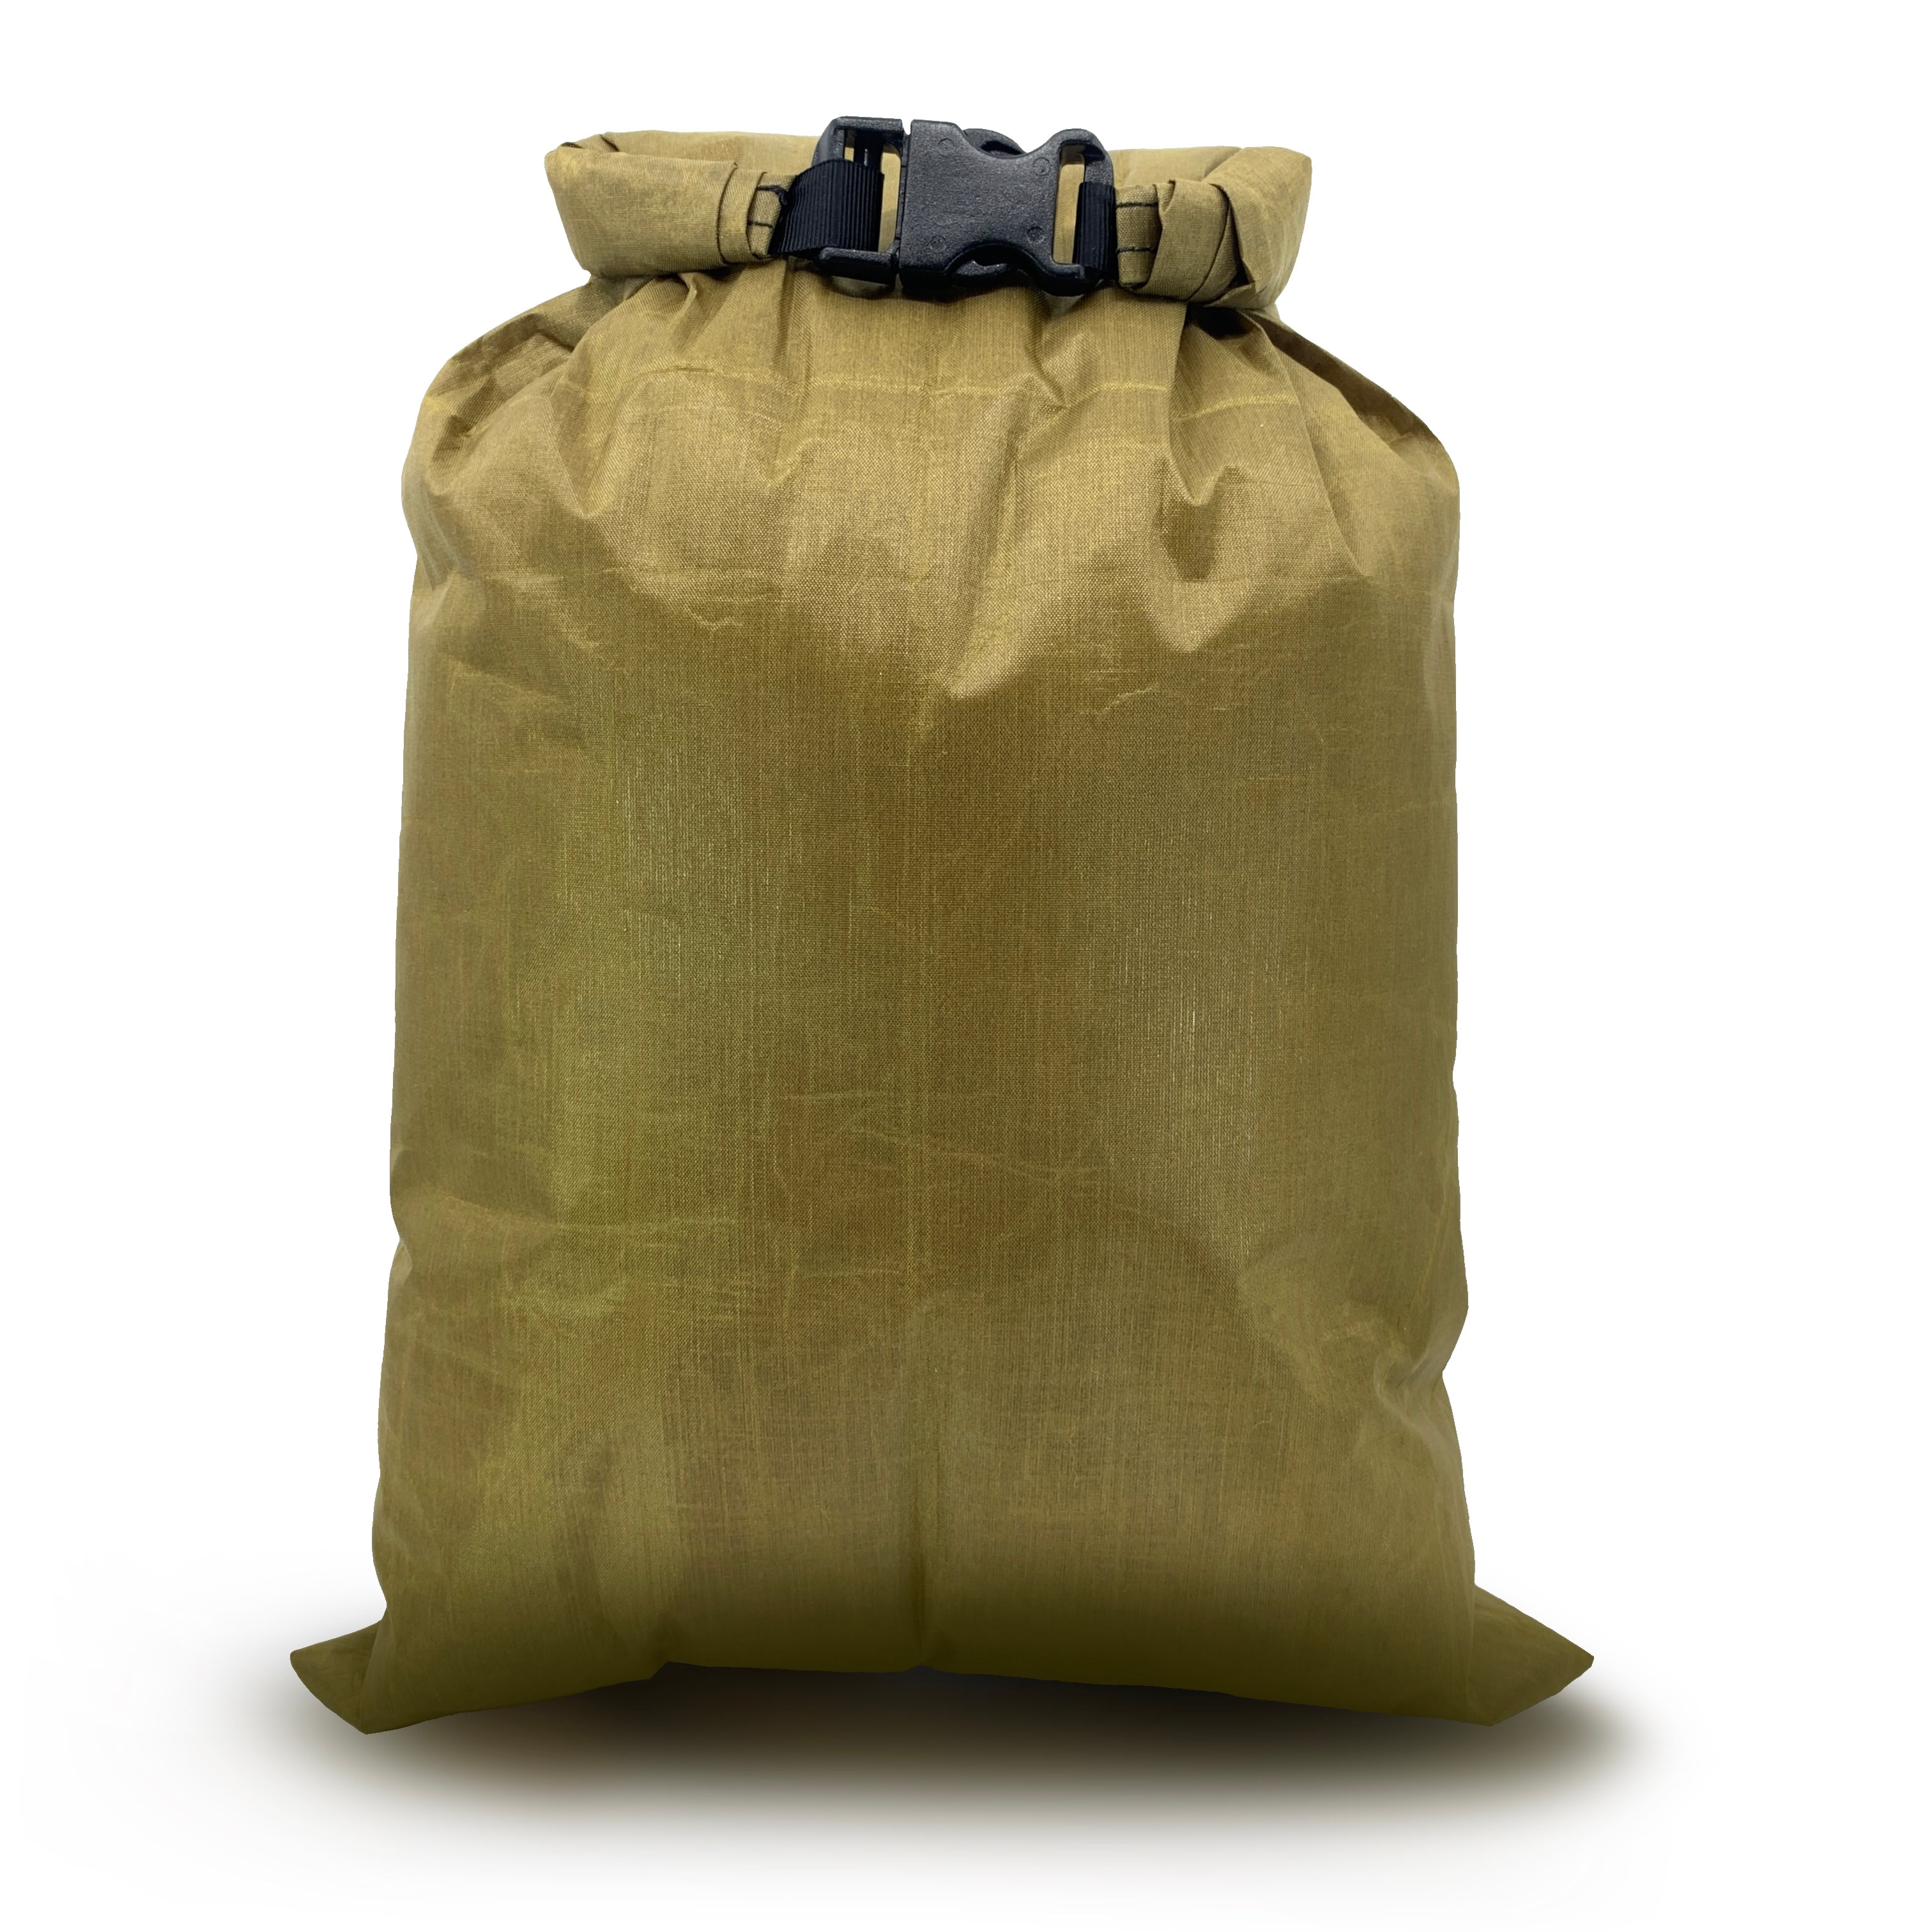 China Composite Bag Manufacturers & Suppliers factory and suppliers |  Eastmoon